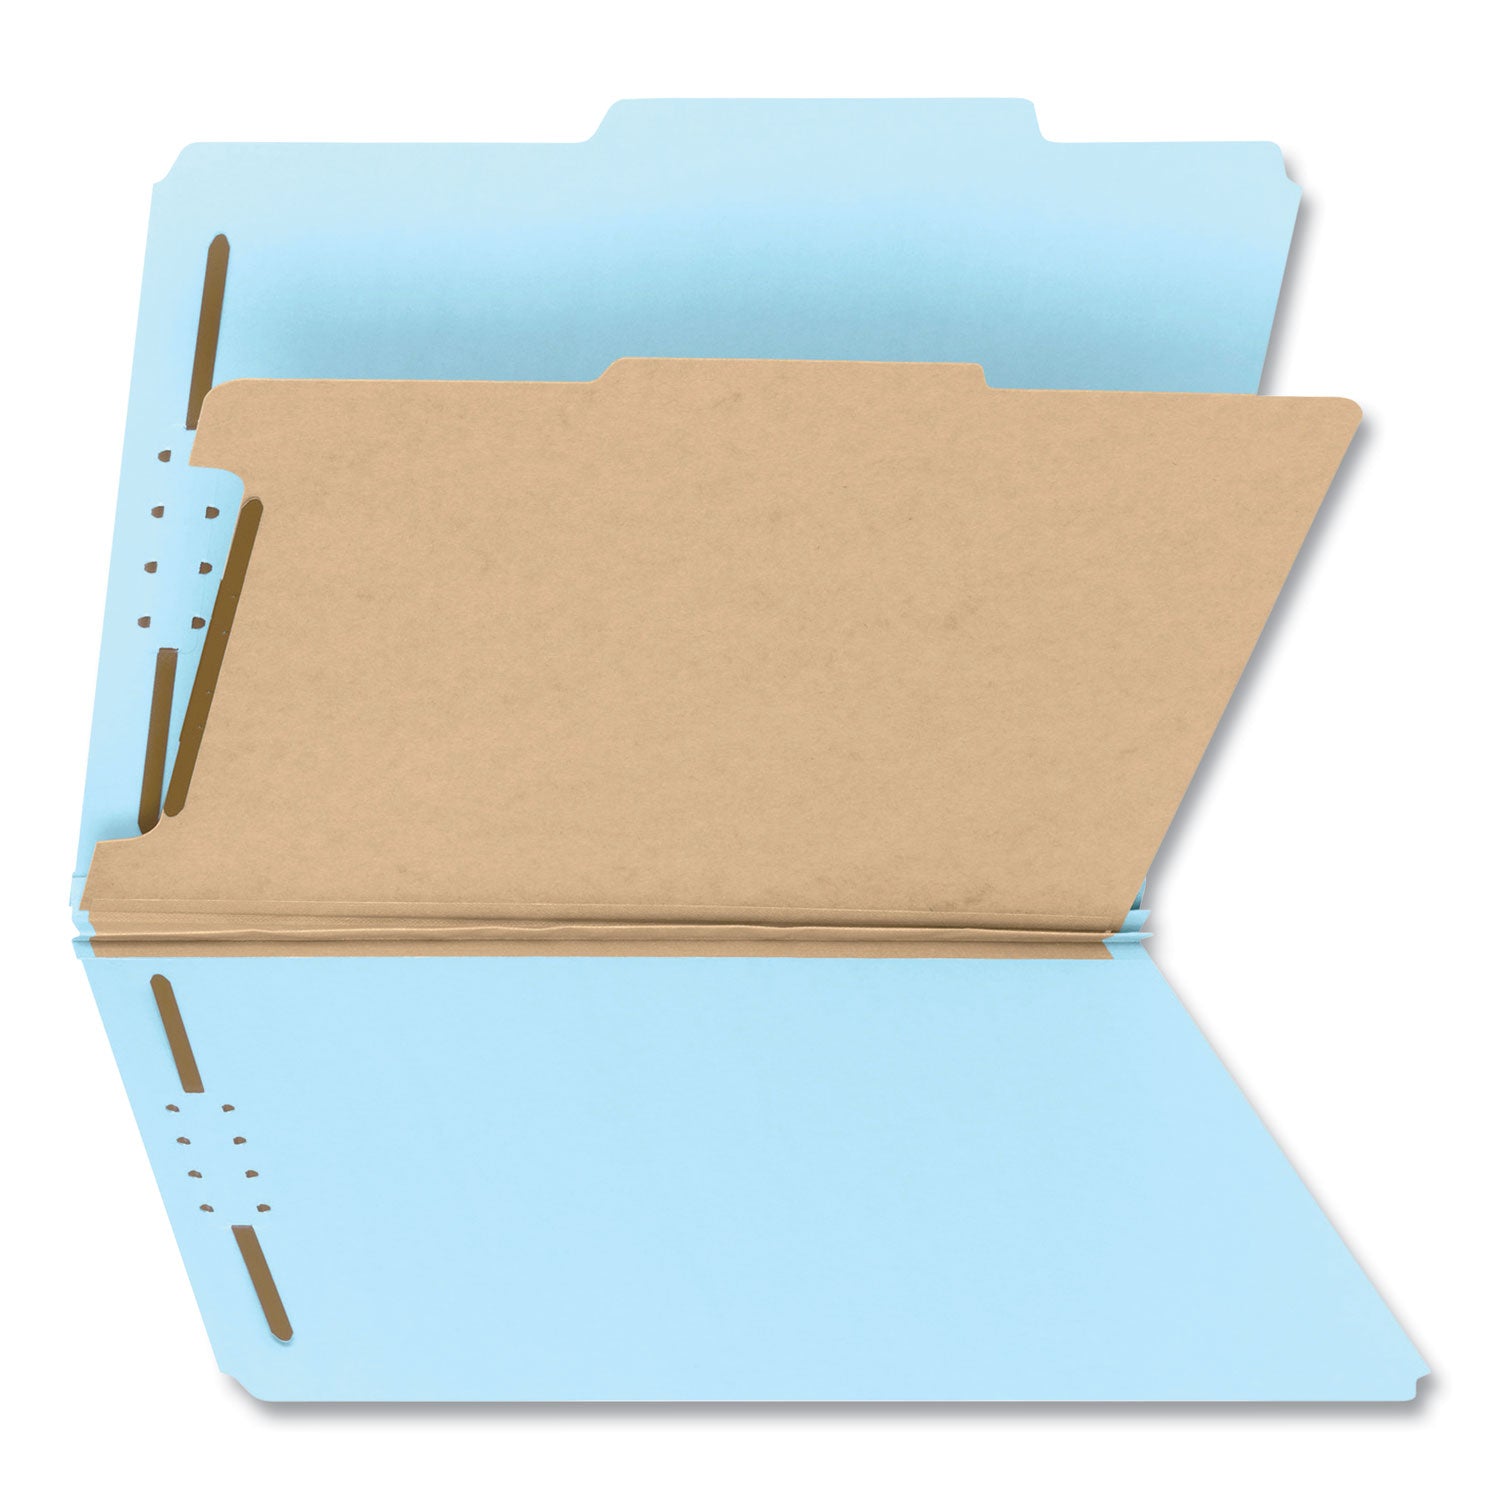 Recycled Pressboard Classification Folders, 2" Expansion, 1 Divider, 4 Fasteners, Letter Size, Blue Exterior, 10/Box - 